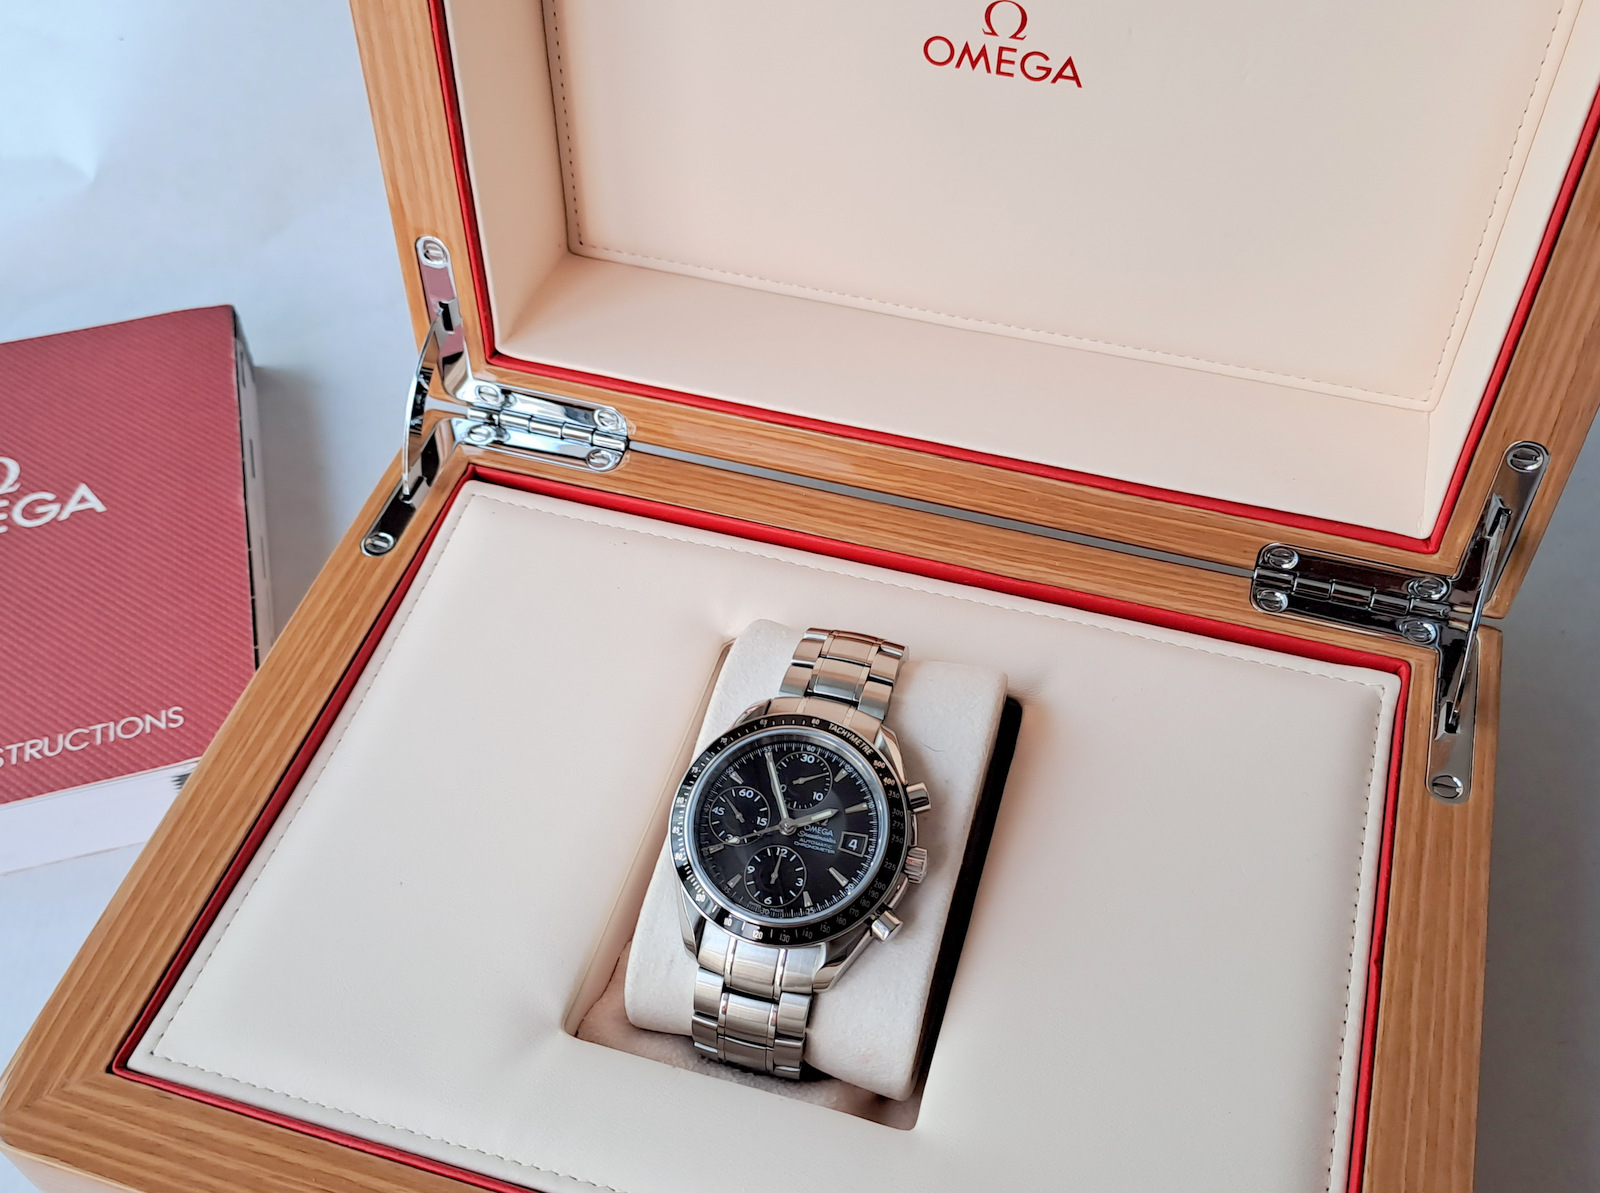 Omega Speedmaster Ref.3210.50.00 Chronometer Automatic Watch 40mm Wooden Case 2008 Model - Image 3 of 13